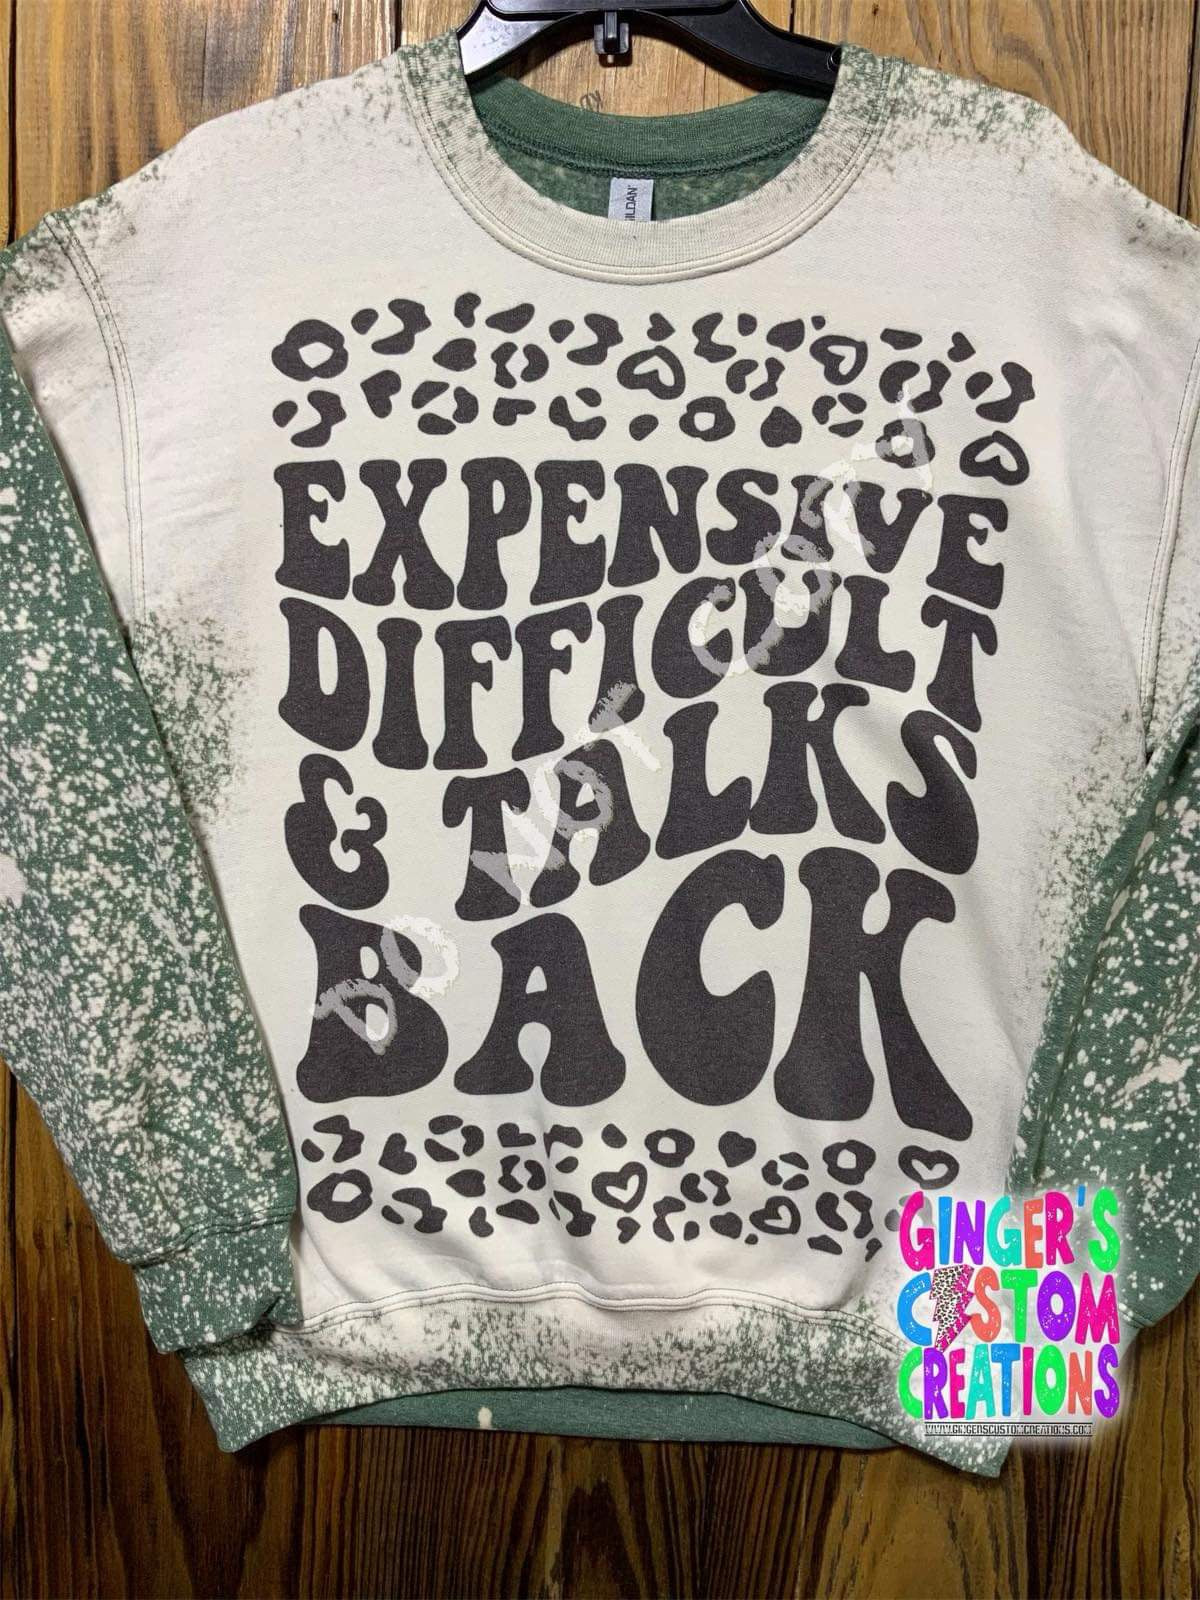 EXPENSIVE DIFFICULT AND TALKS BACK CREWNECK